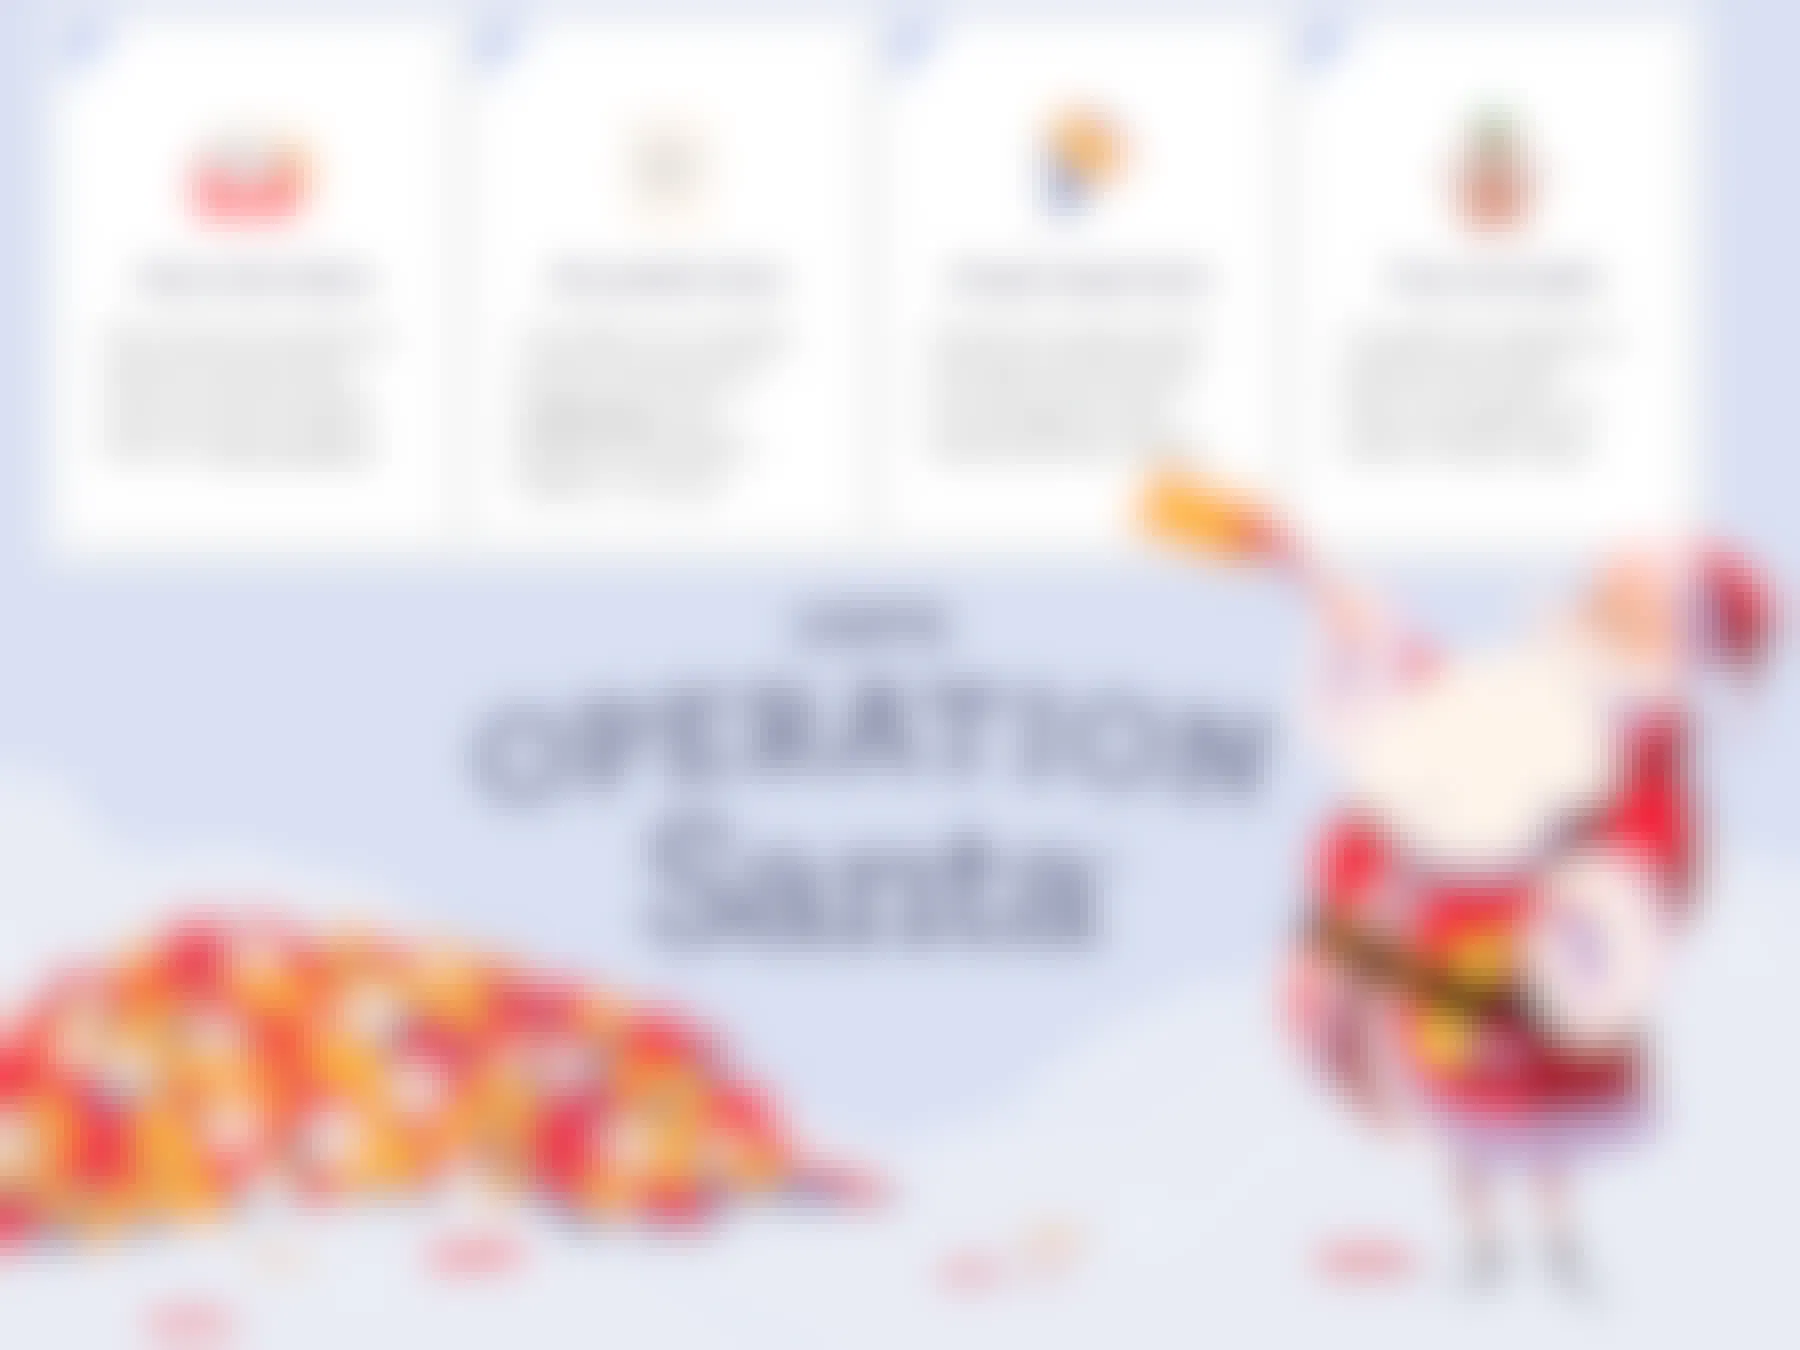 4 steps to how Operation Santa works.